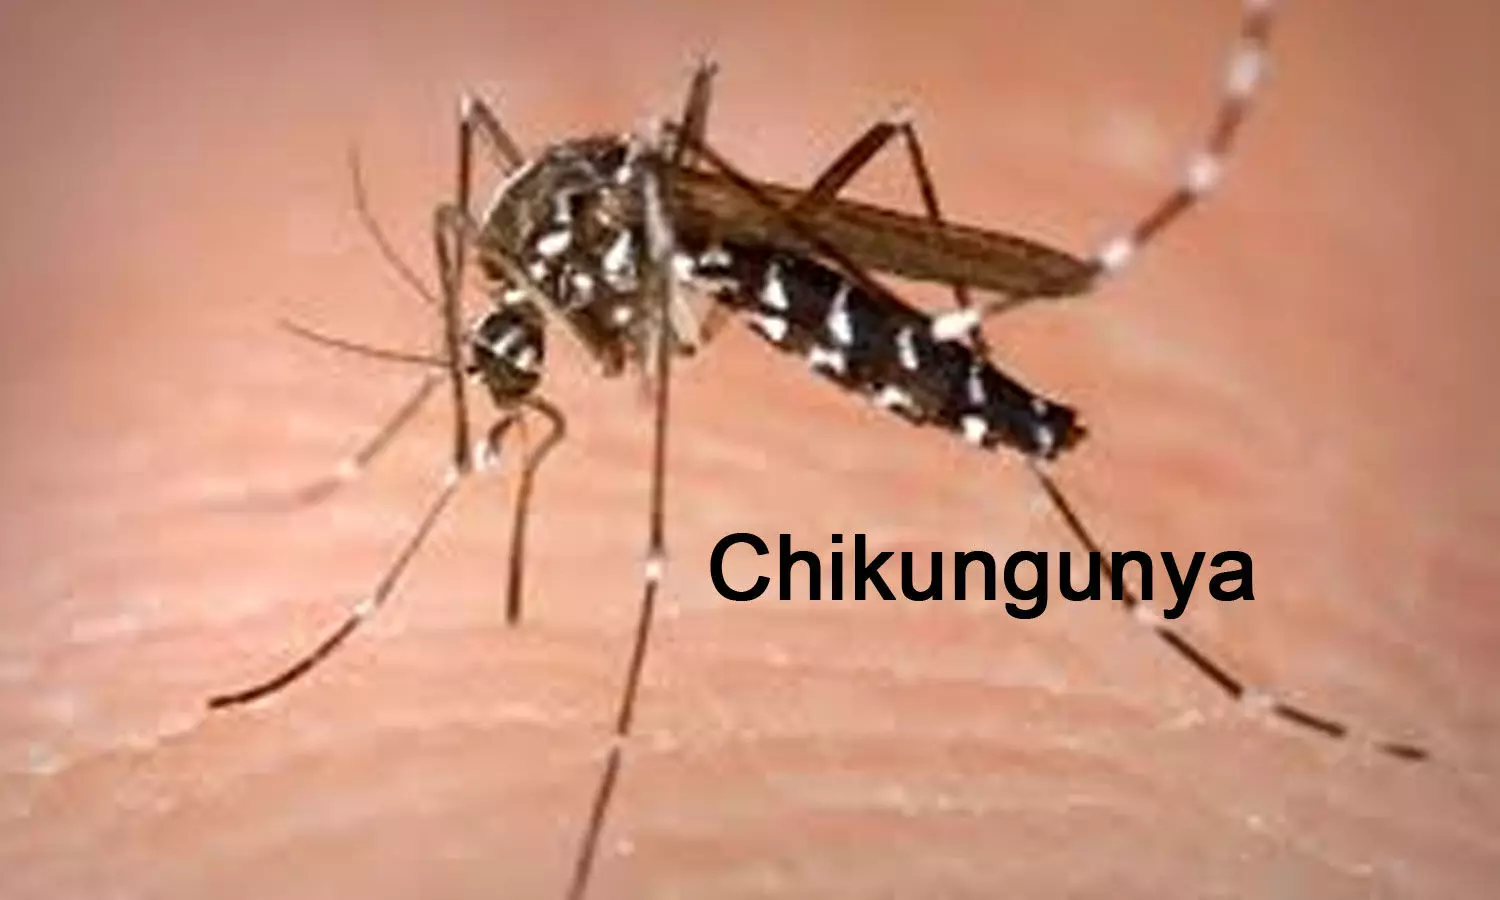 Clinical outcomes of chikungunya vary in kids if coinfected with scrub typhus: Study